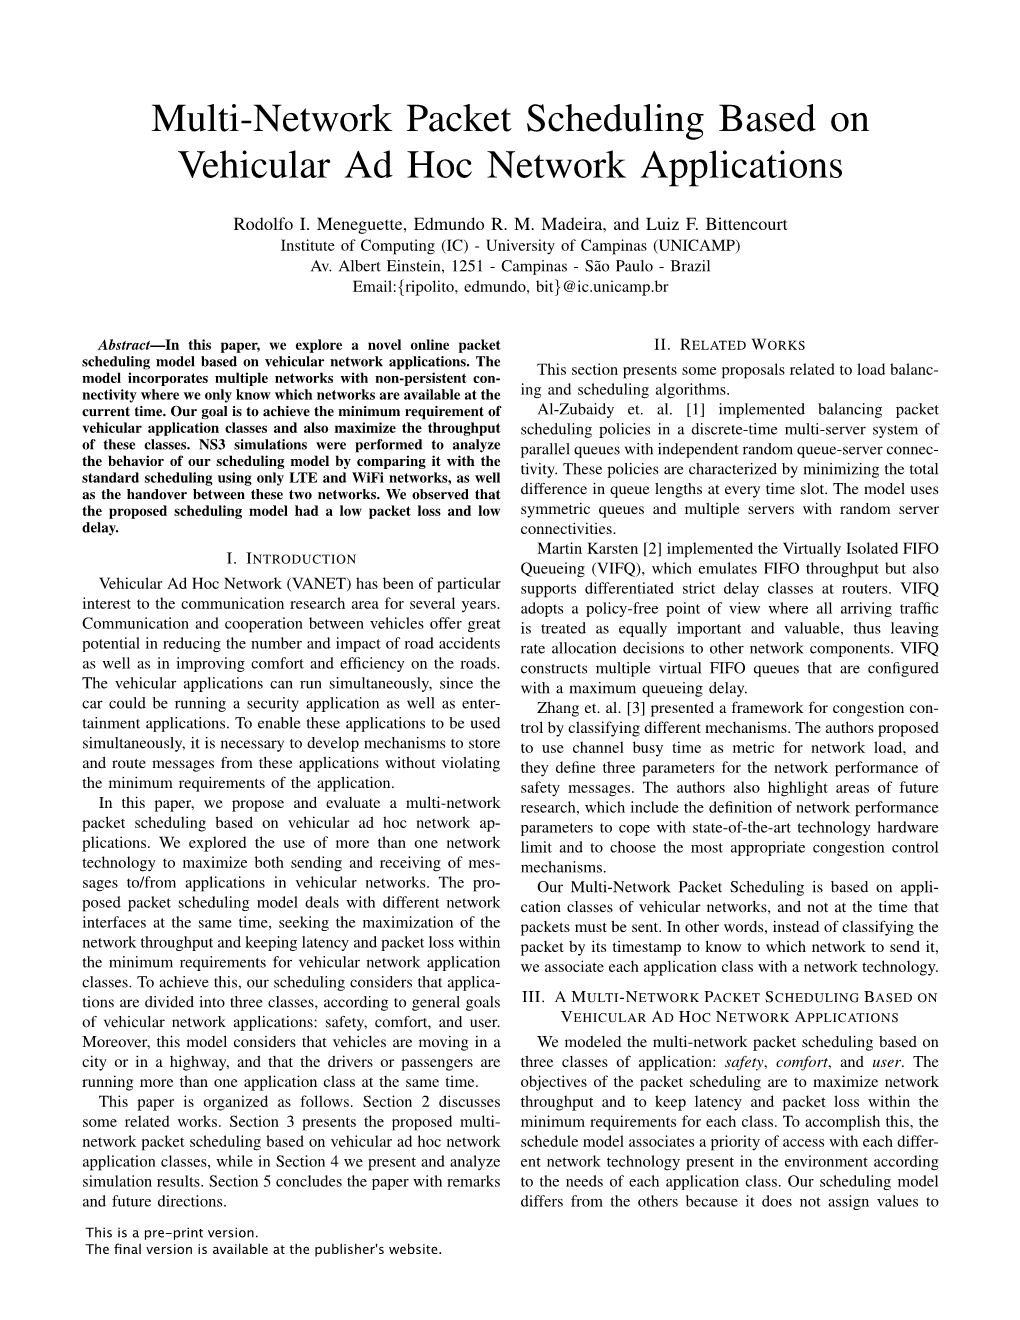 Multi-Network Packet Scheduling Based on Vehicular Ad Hoc Network Applications